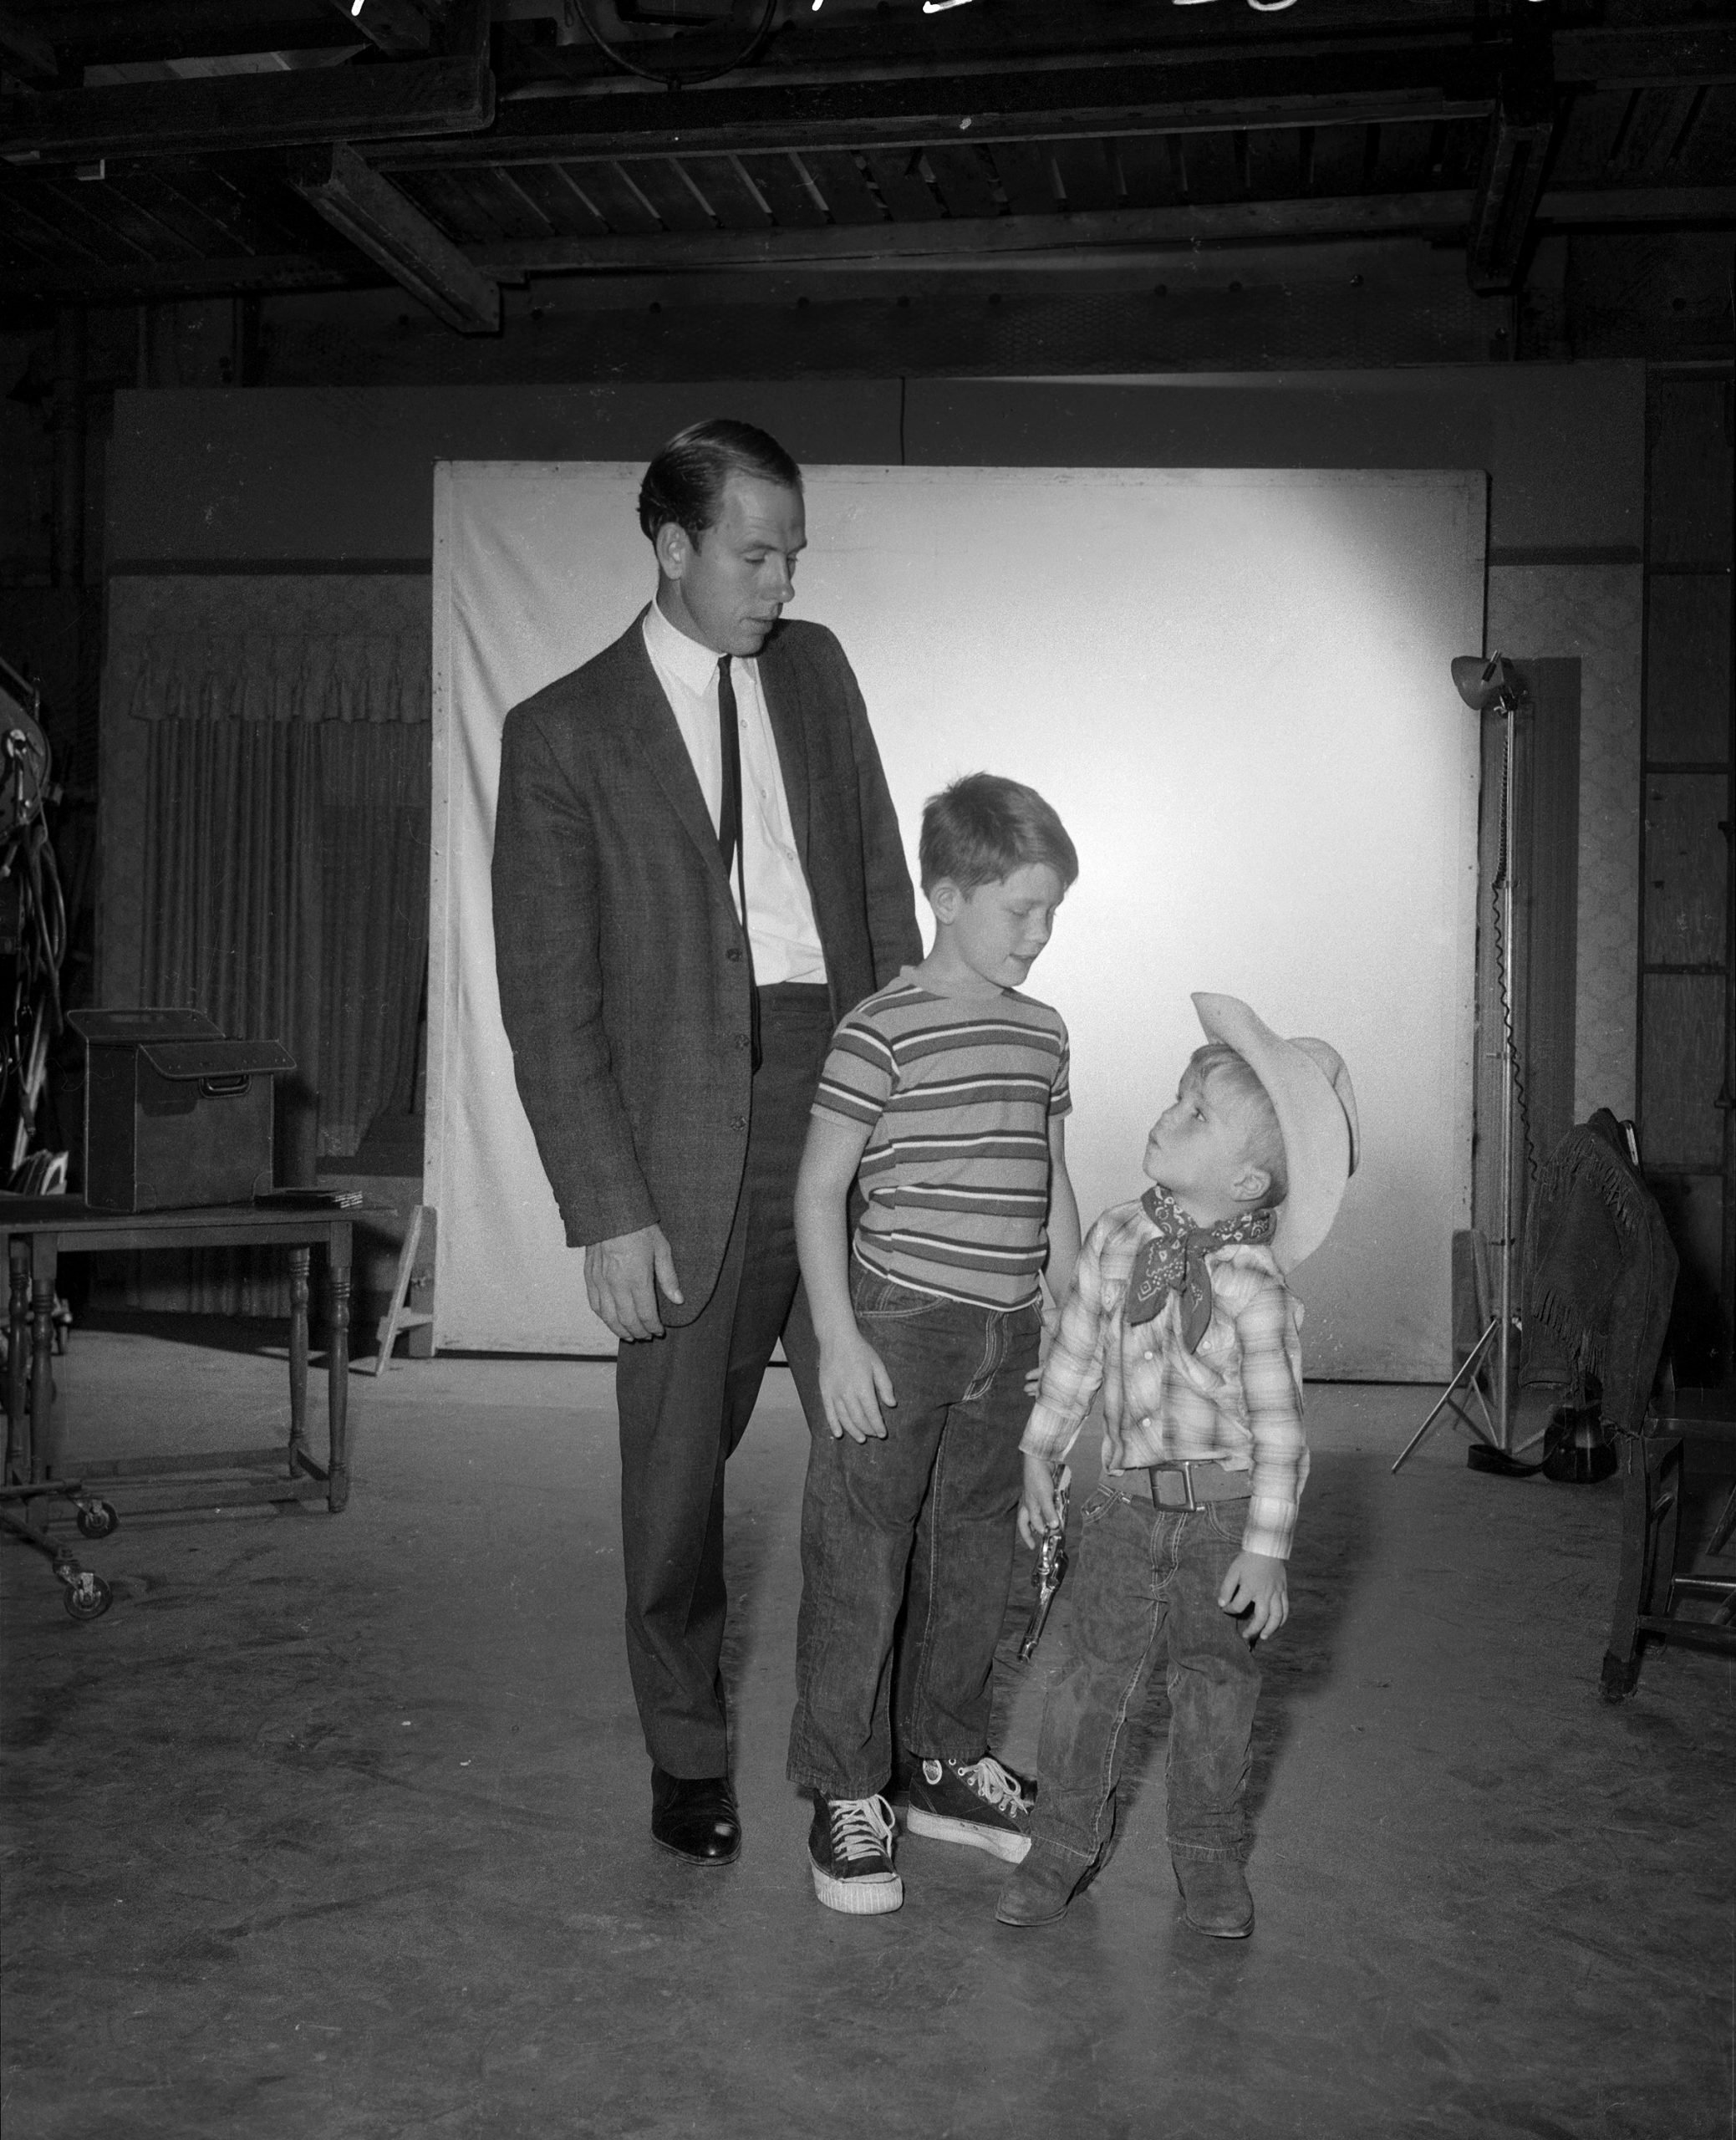 (left to right): Rance Howard with his sons, actors Ron Howard and Clint Howard on 'The Andy Griffith Show' set in 1963